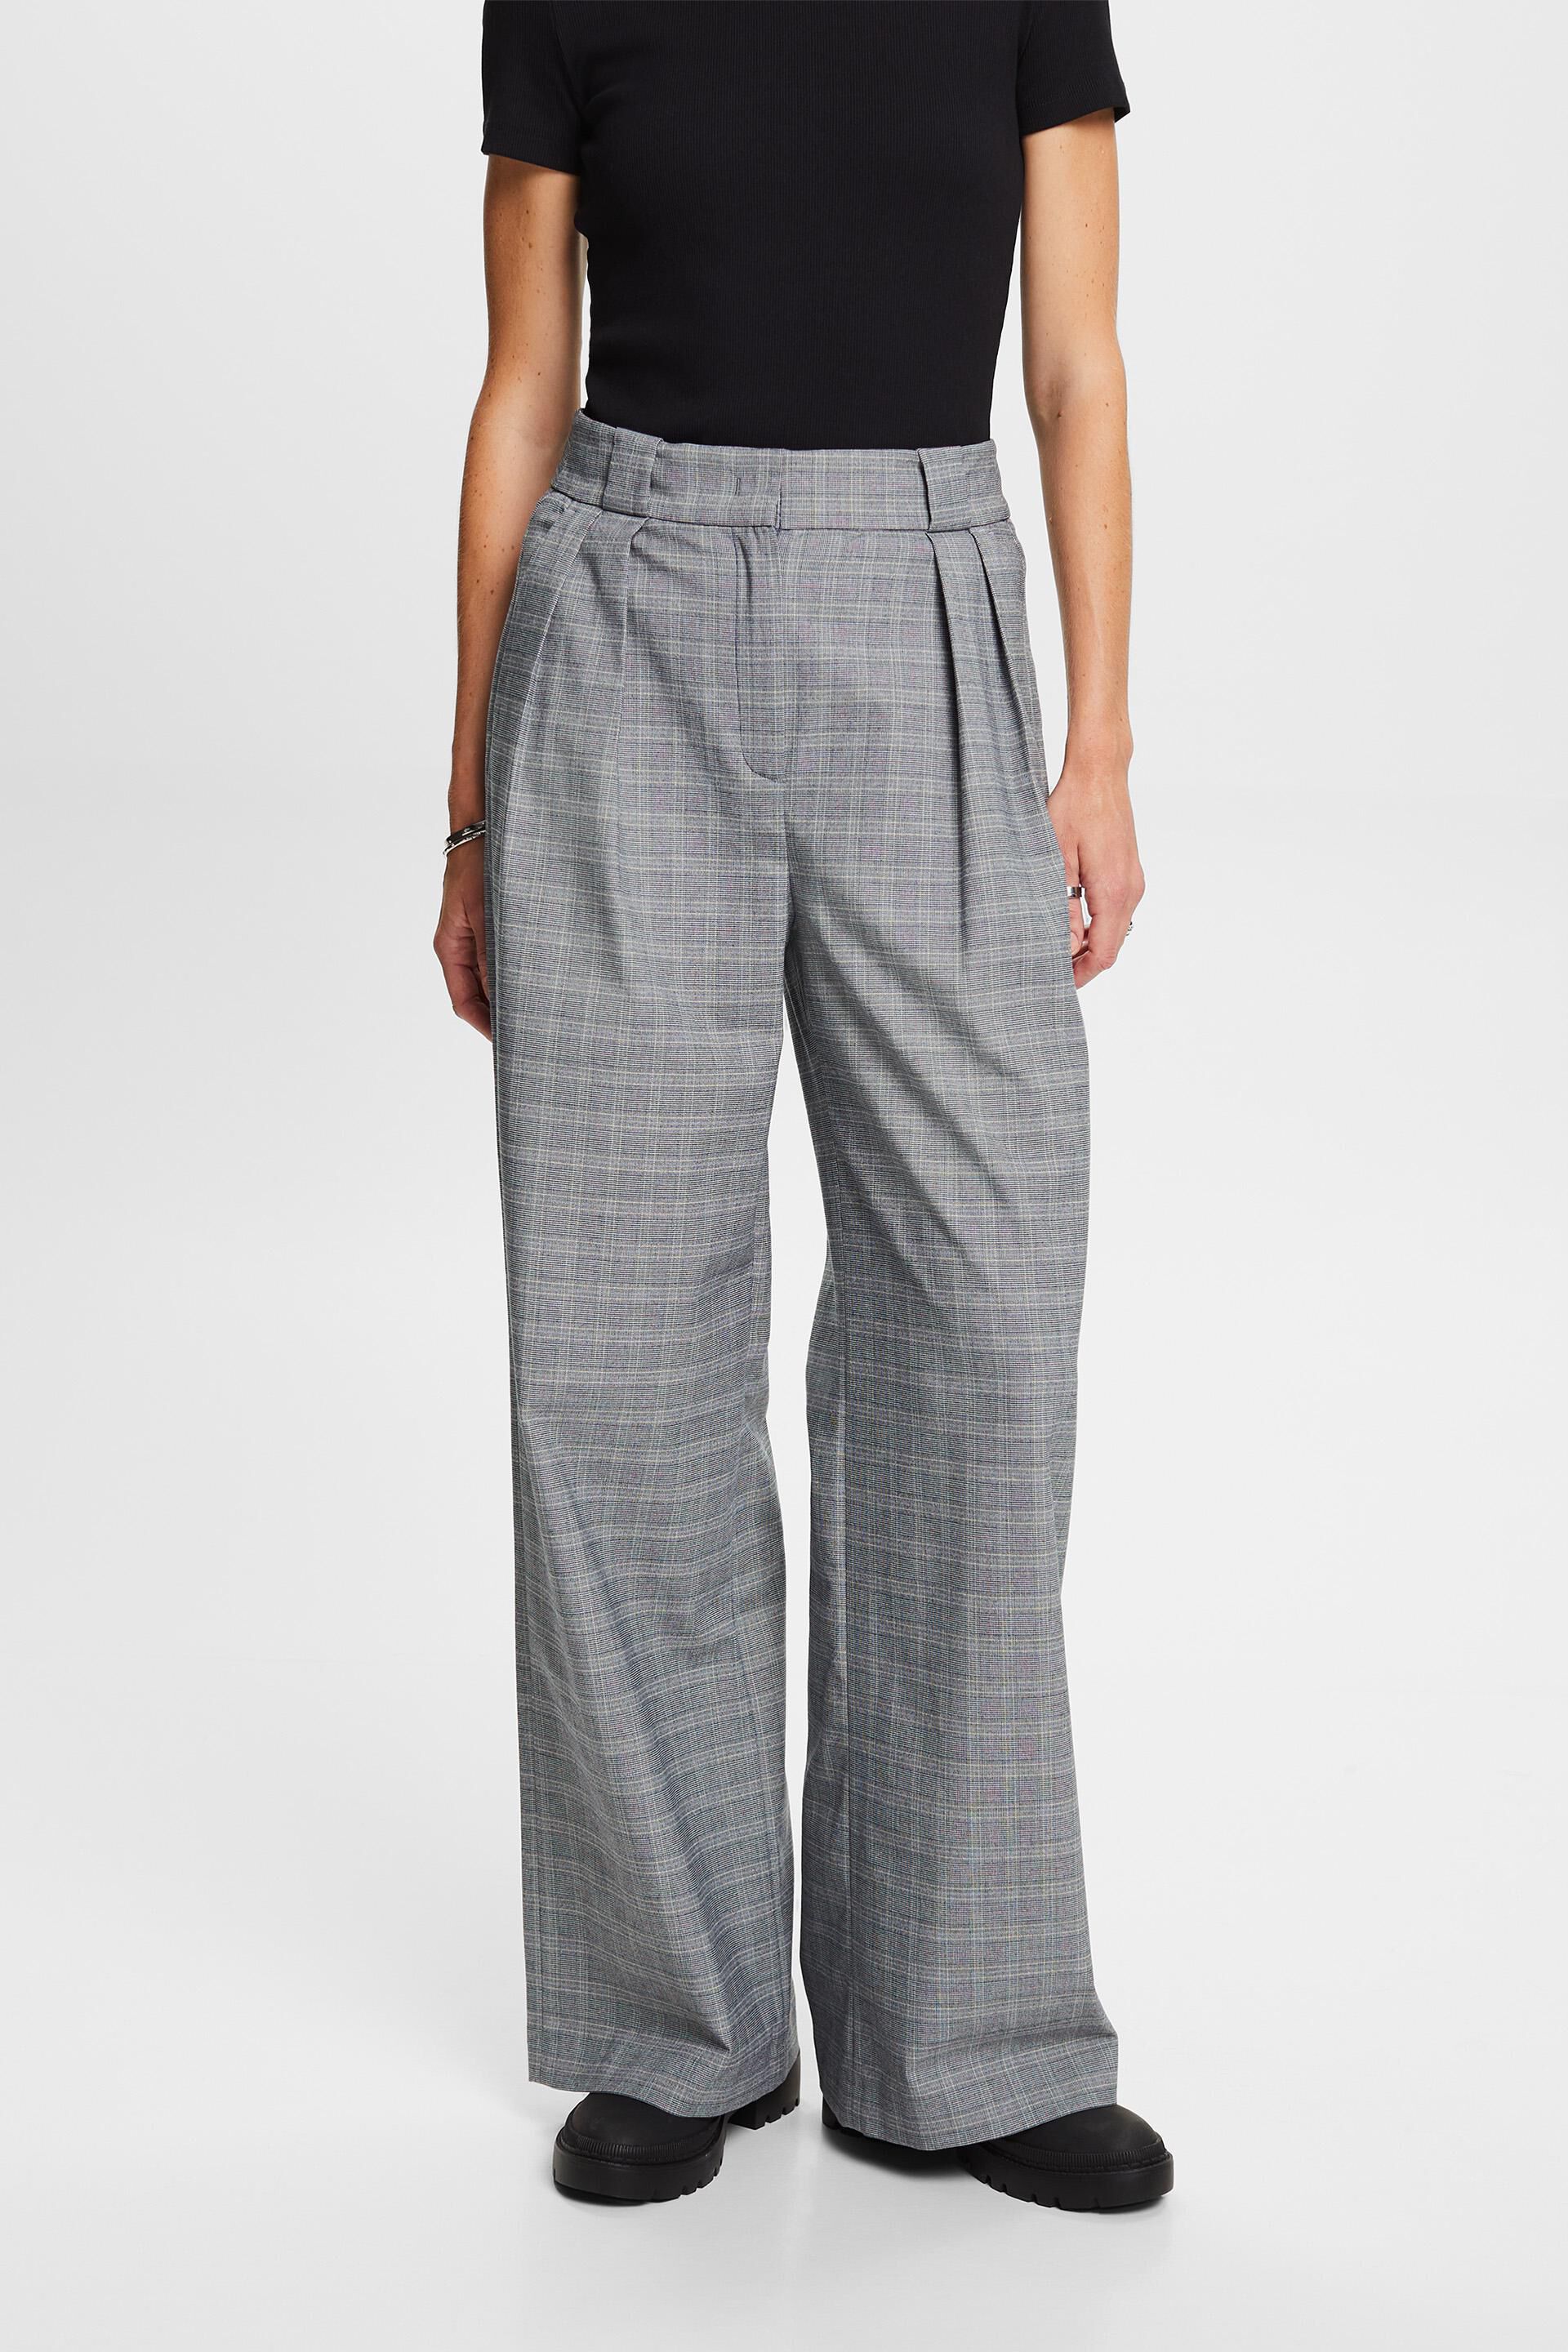 navy blue checked trousers - the school uniform